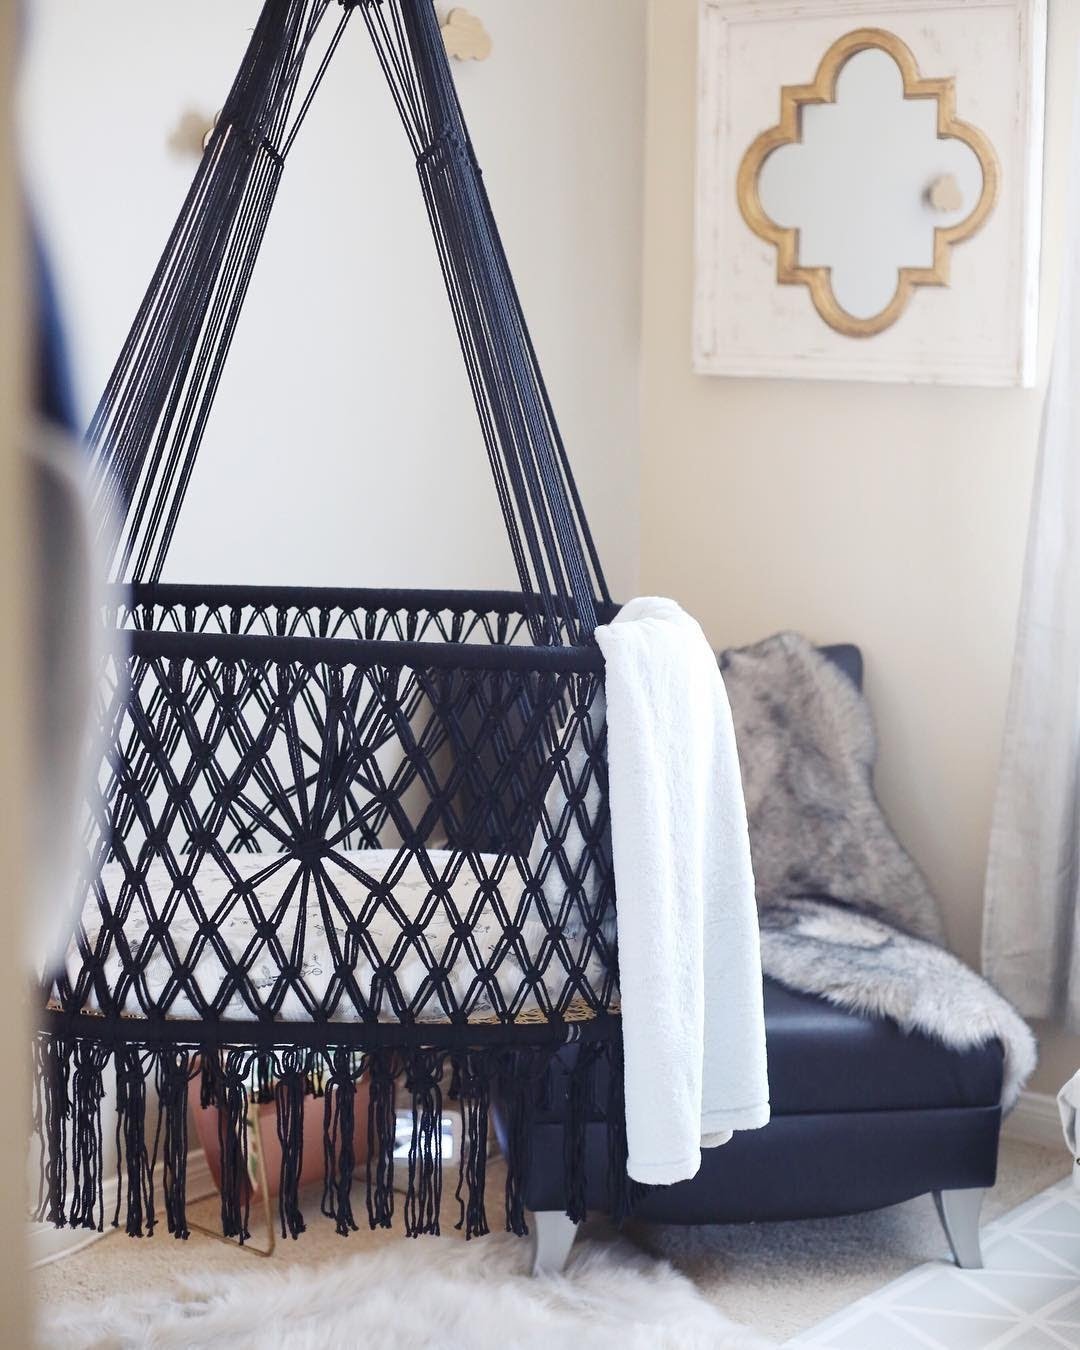 black color hanging bassinet next to a armchair